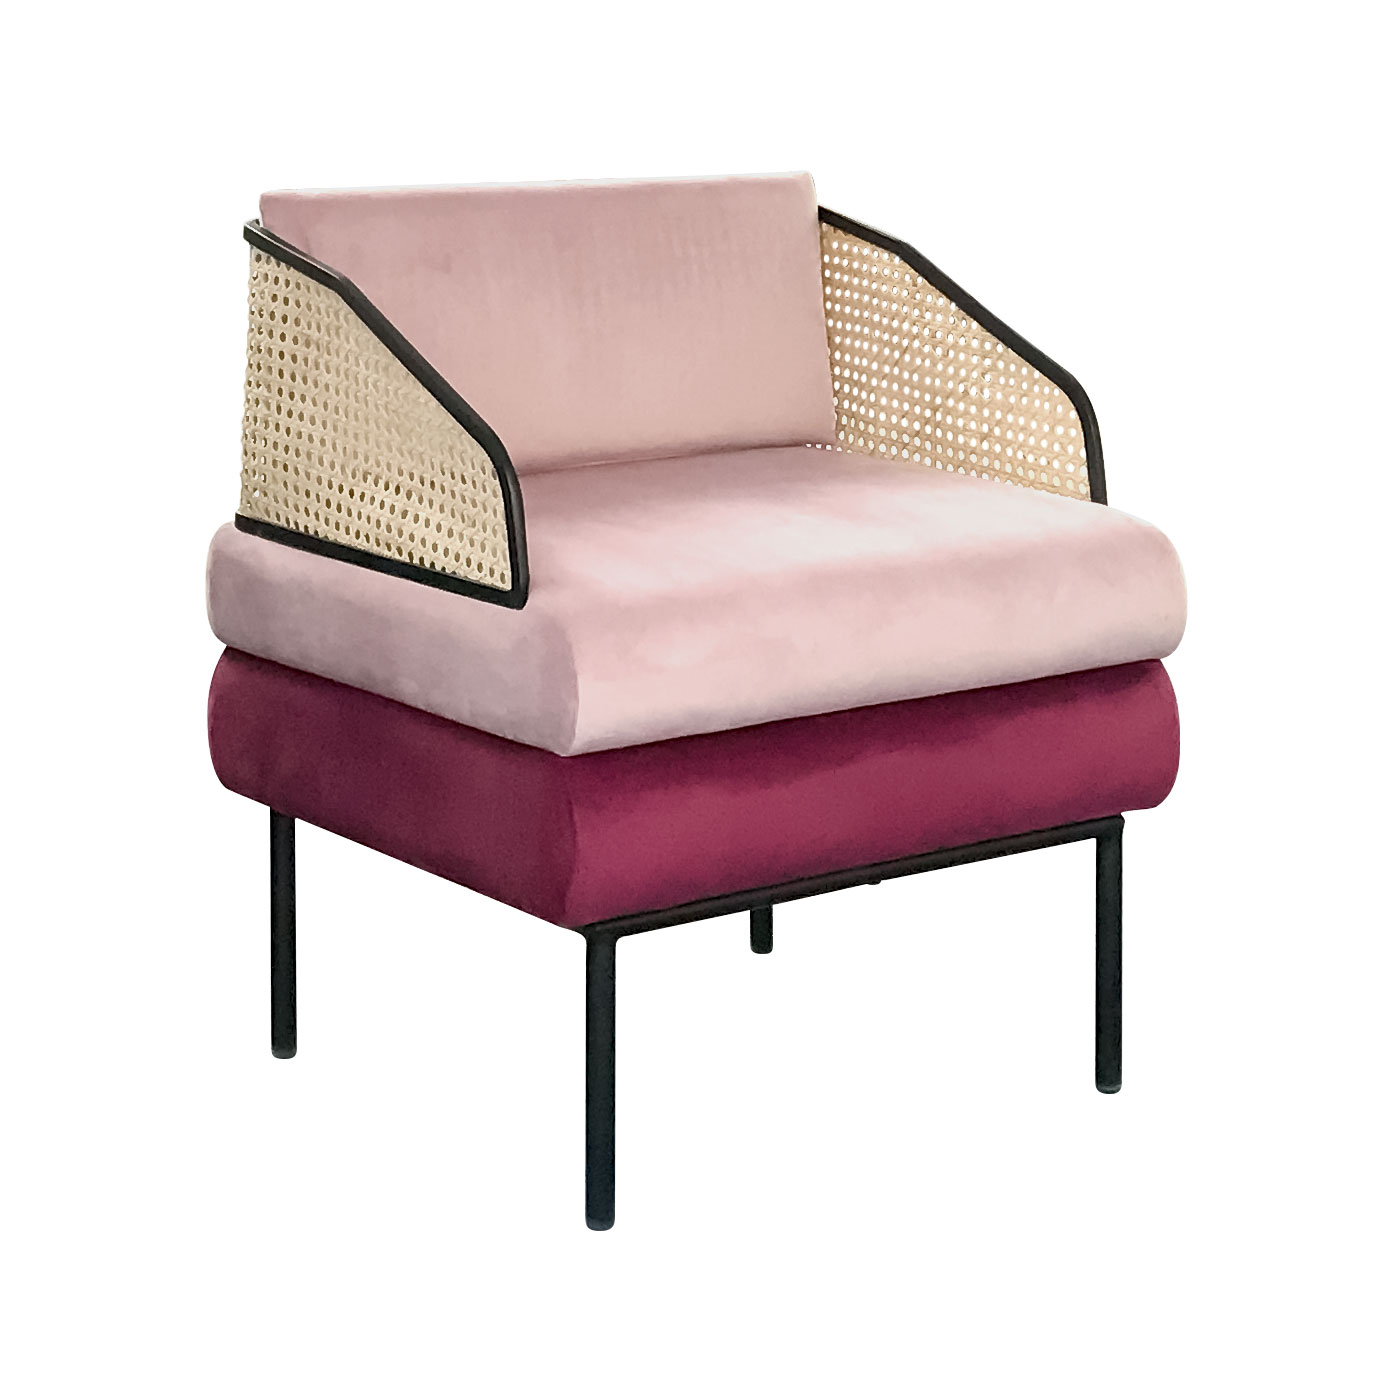 Blurred Lines Pink Armchair